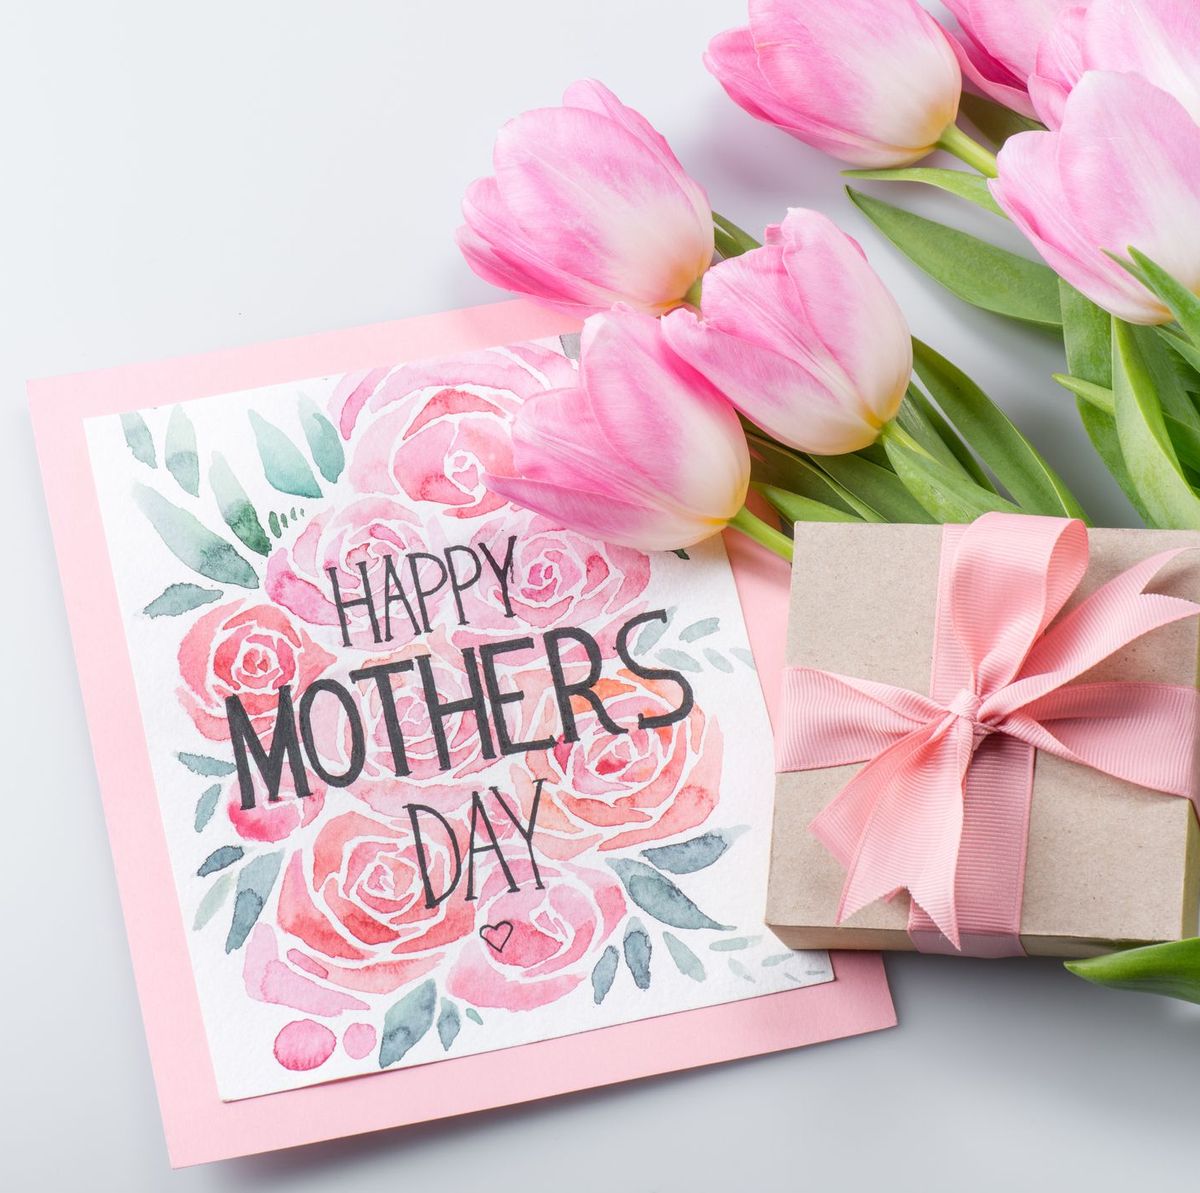 Mother's Day Gift Ideas: Shop the best gifts that any mom will love